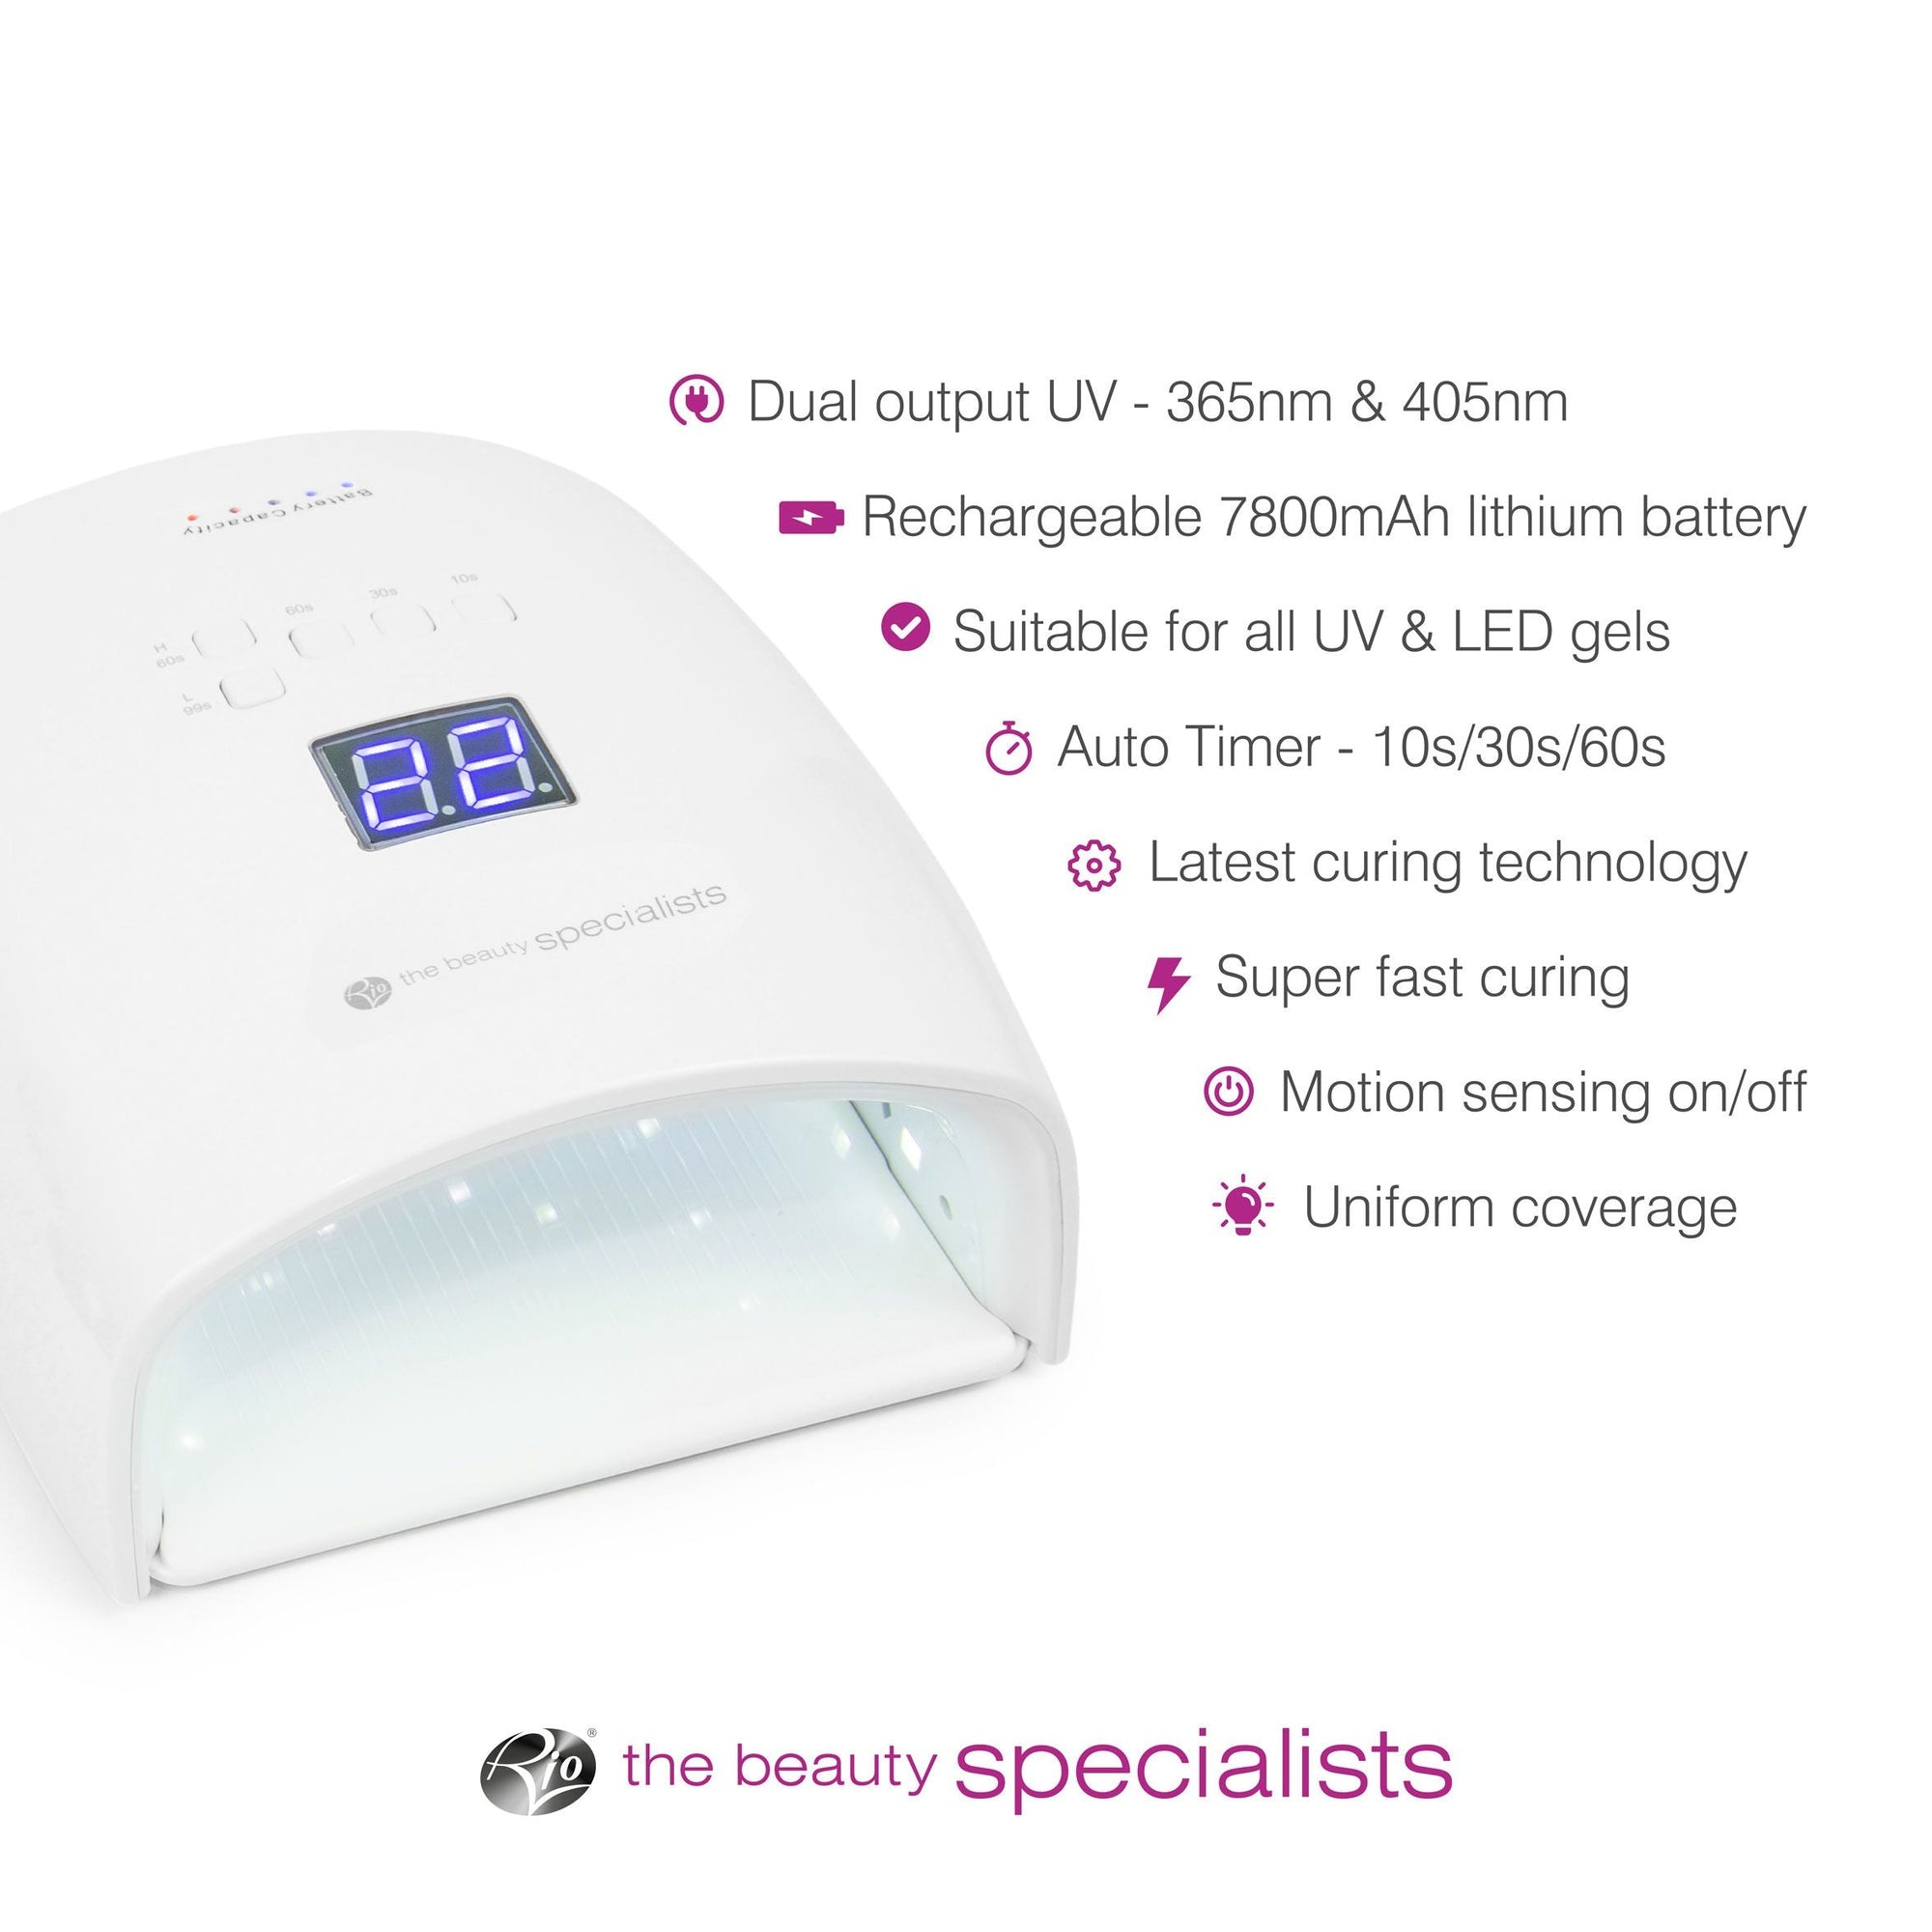 Salon Pro Rechargeable 48W UV & LED Lamp with infographic and list of features dual output UV 365nm & 405nm, rechargeable 7800mAh lithium battery, suitable for all UV & LED gels, Auto timer 10s/30s/60s, latest curing technology, super fast curing, motion sensing on/off, uniform coverage